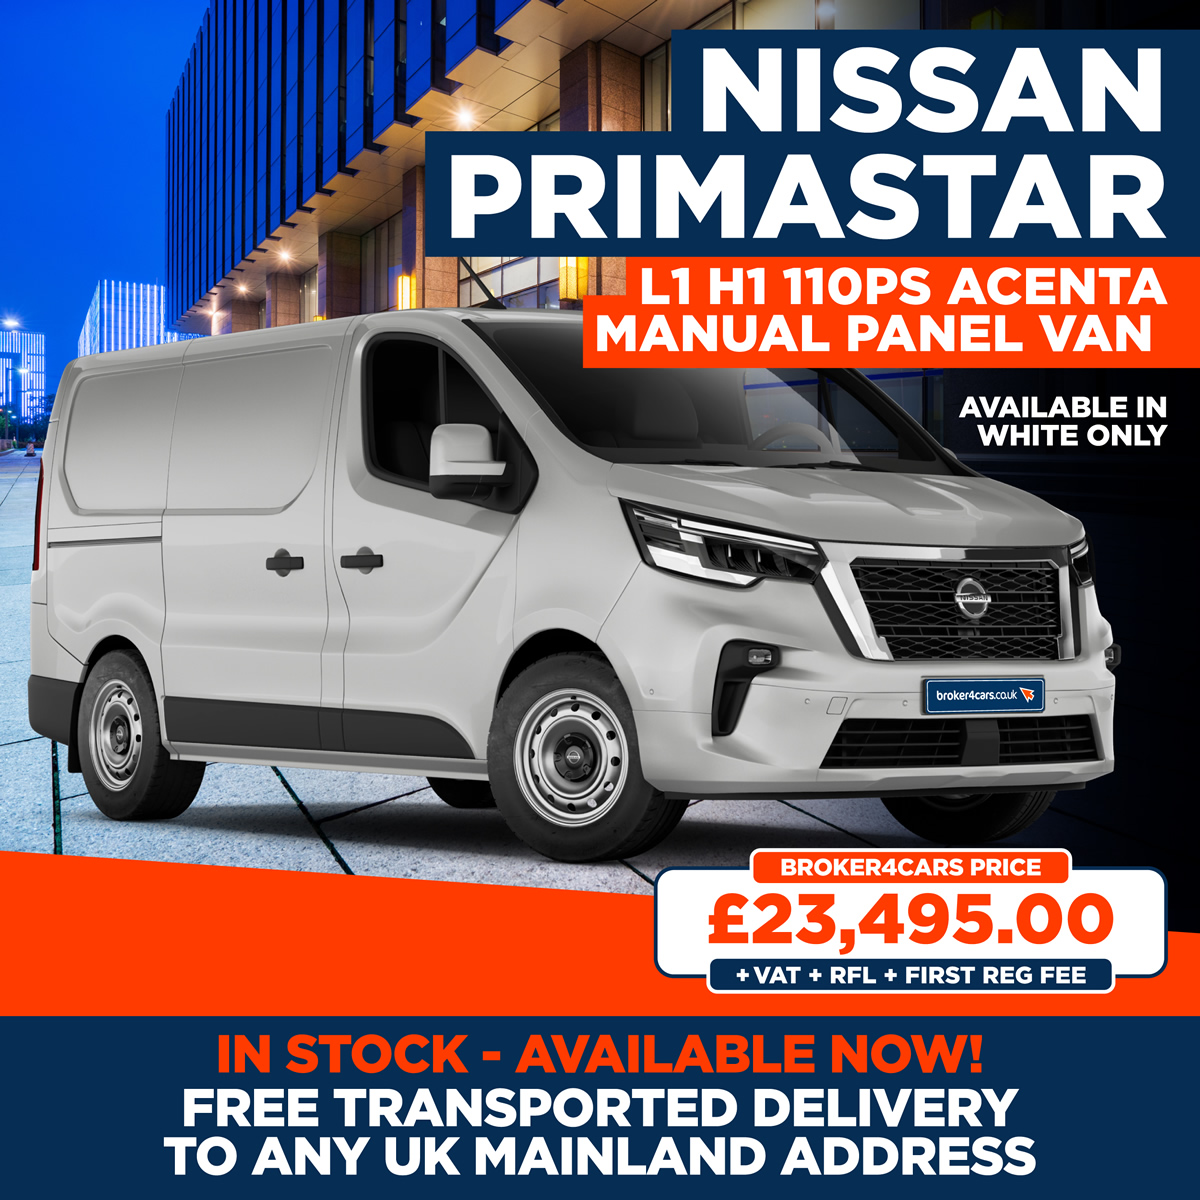 Nissan Primastar L1 H1 110PS Acenta Manual Panel Van. In stock - available now. Free transported delivery to any uk mainland address. Available in white only. Broker4Cars Price £23,495 OTR